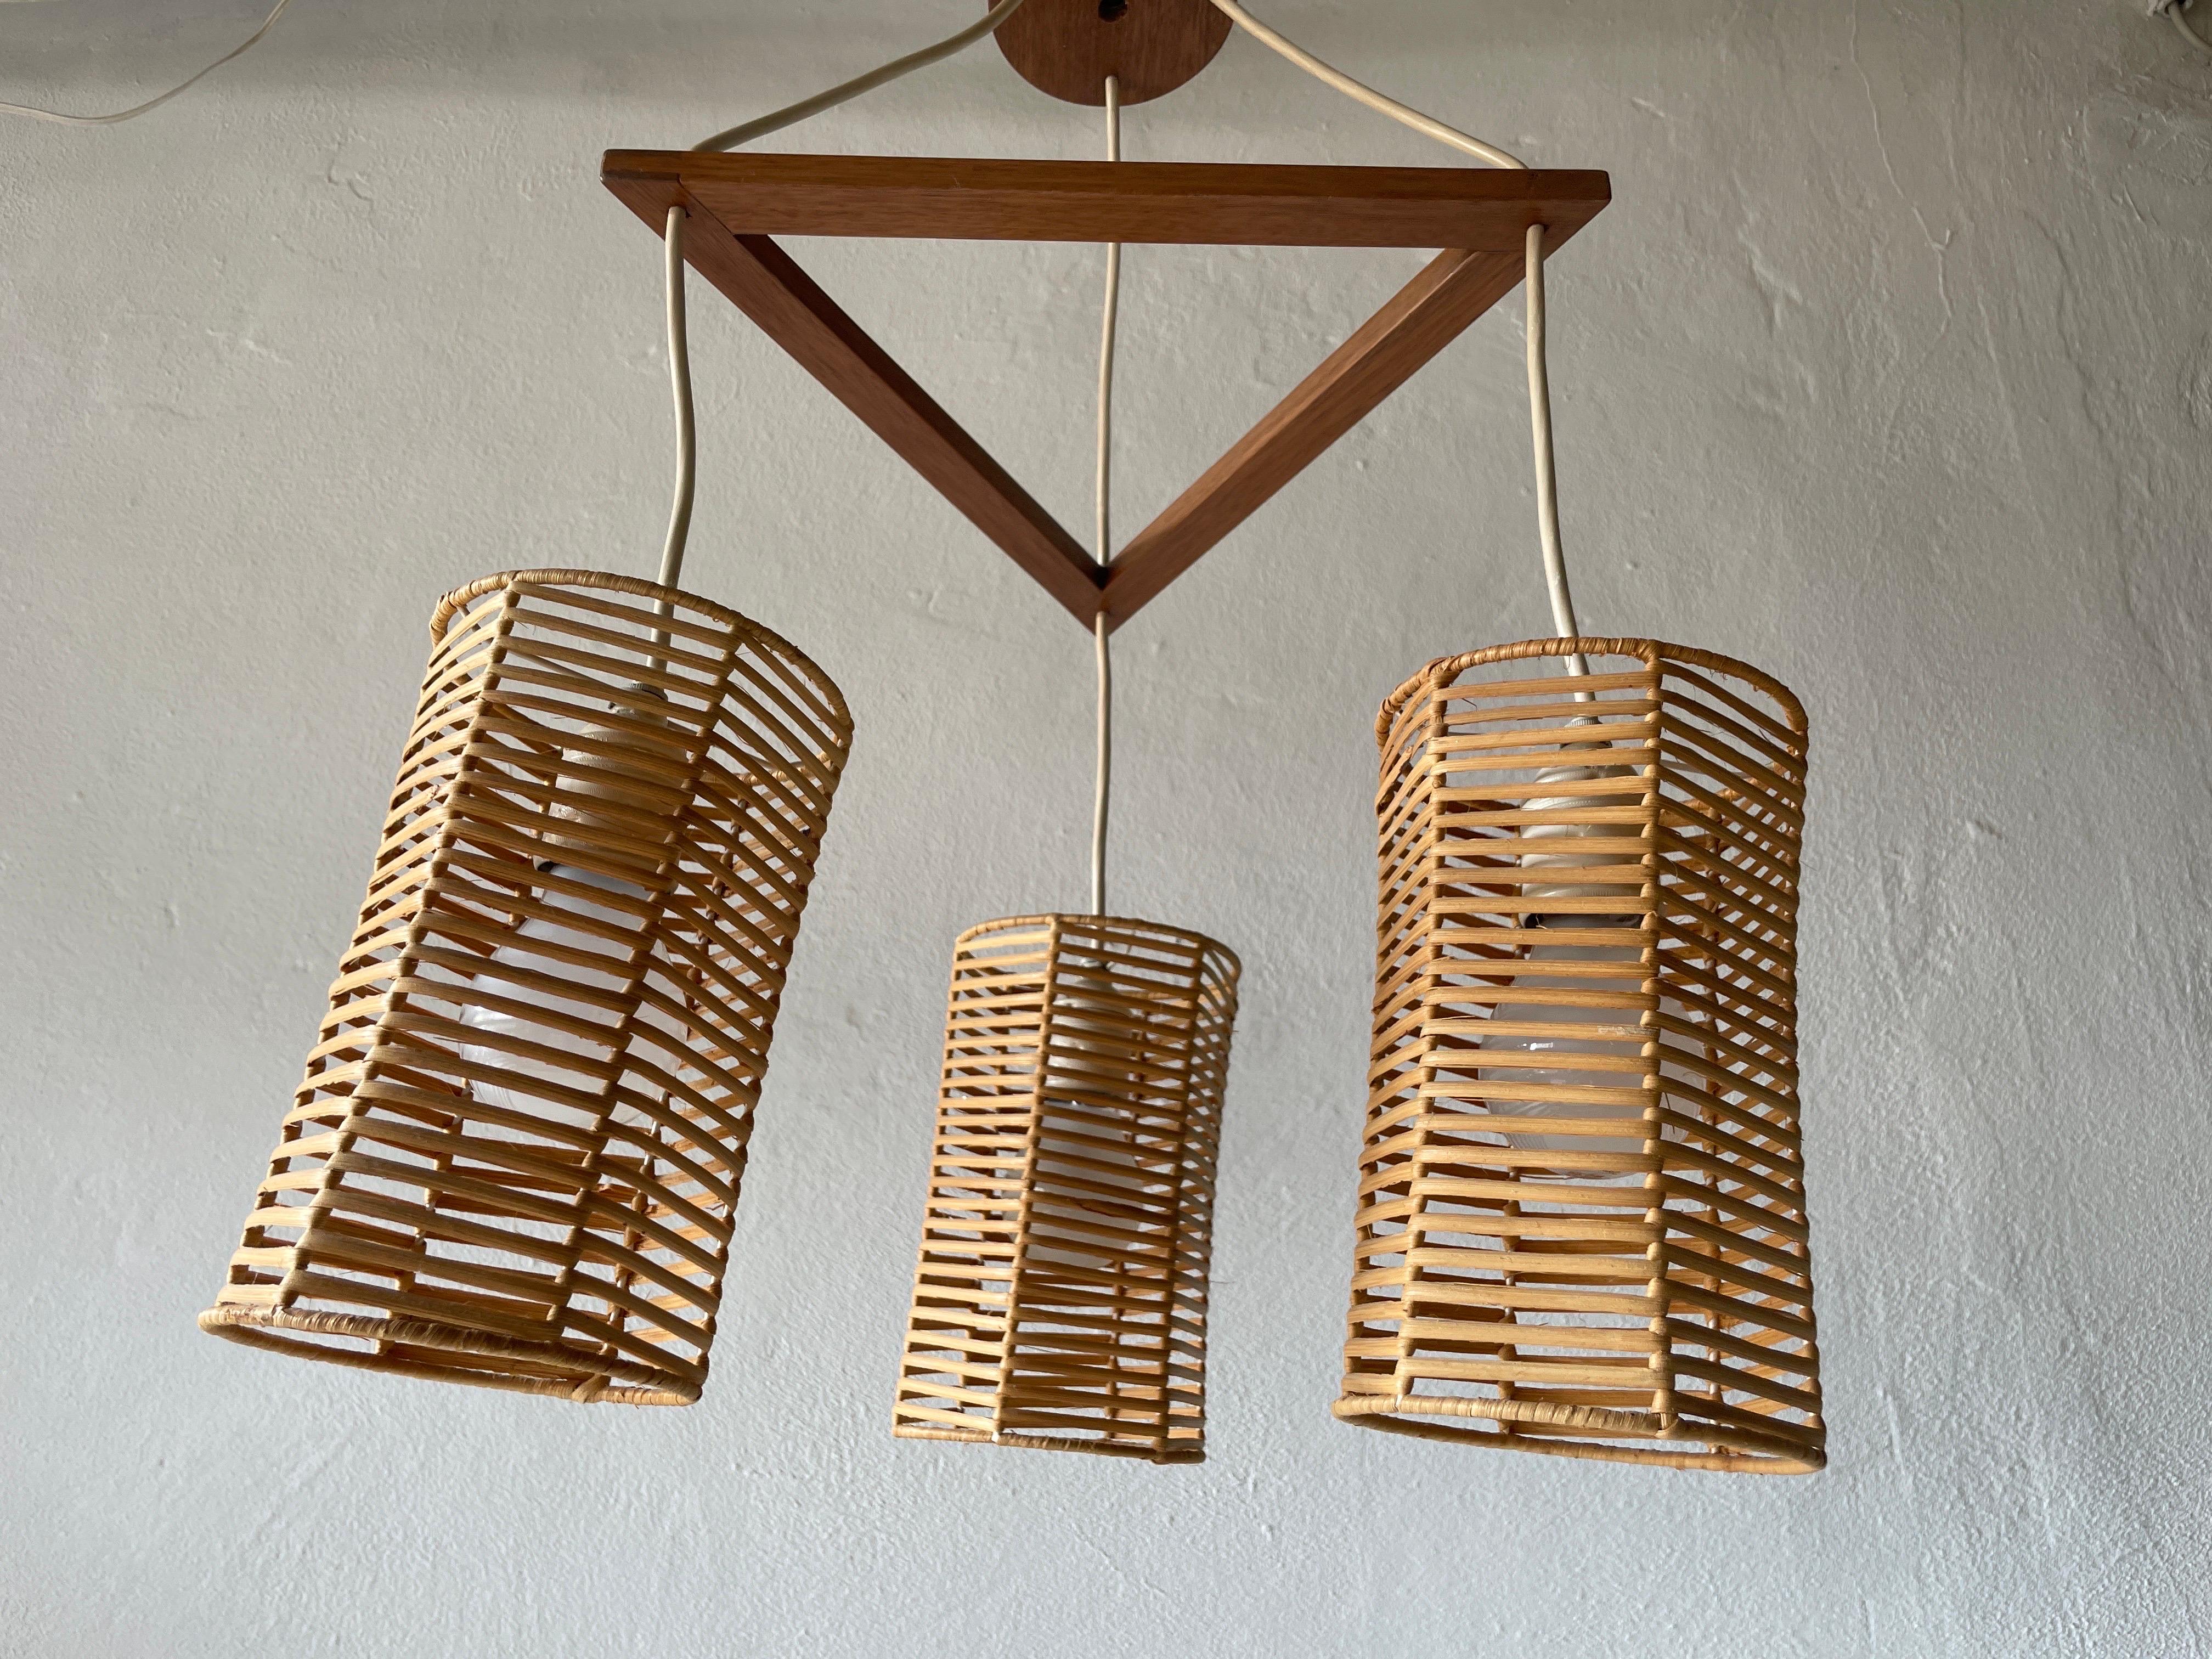 Triple Shade Wicker and Wood Pendant Lamp, 1960s, Germany

Lampshade is in very good vintage condition.
No crack, no missed piece.
Original canopy.

This lamp works with 3x E27 light bulb. Max 100W
Wired and suitable to use with 220V and 110V for